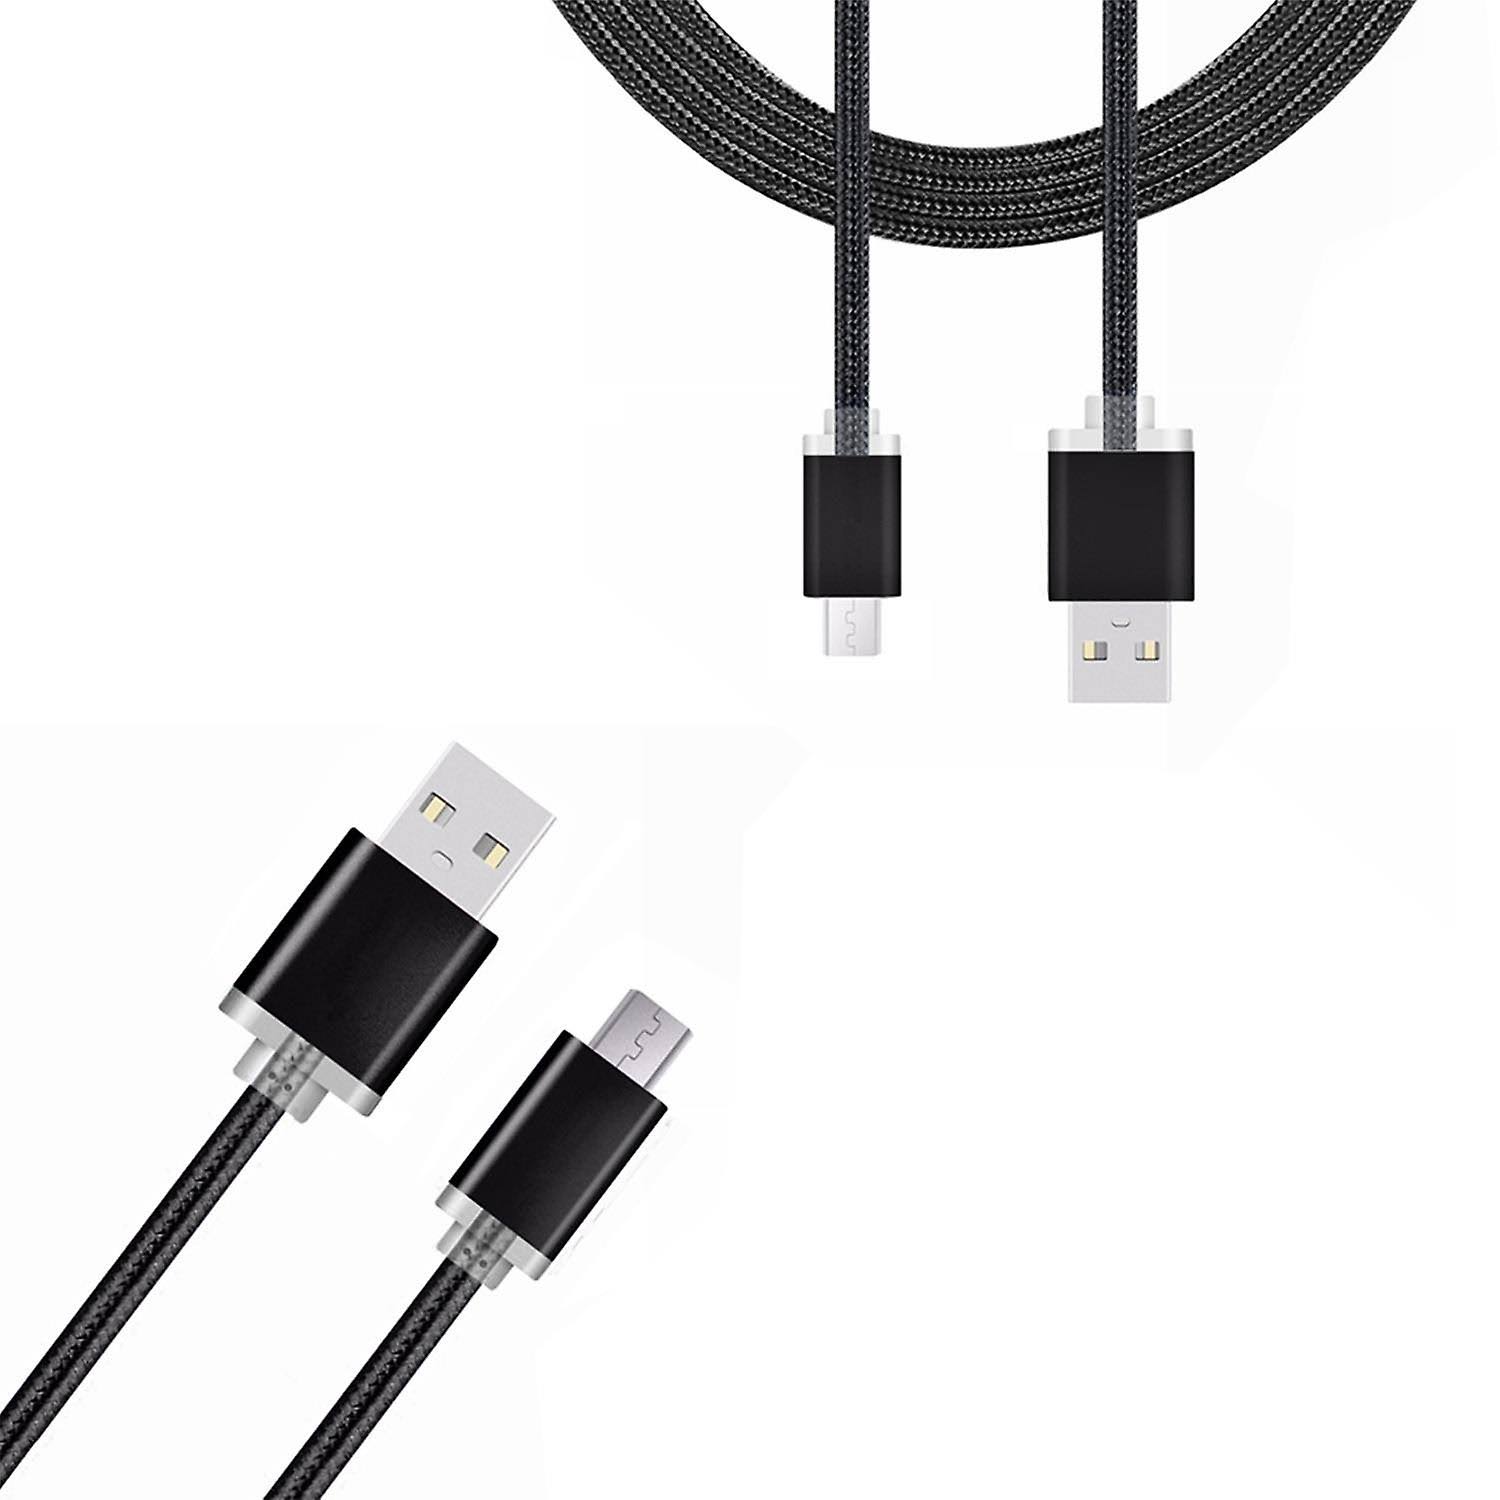 FX Braided USB Cables for Micro USB: Black